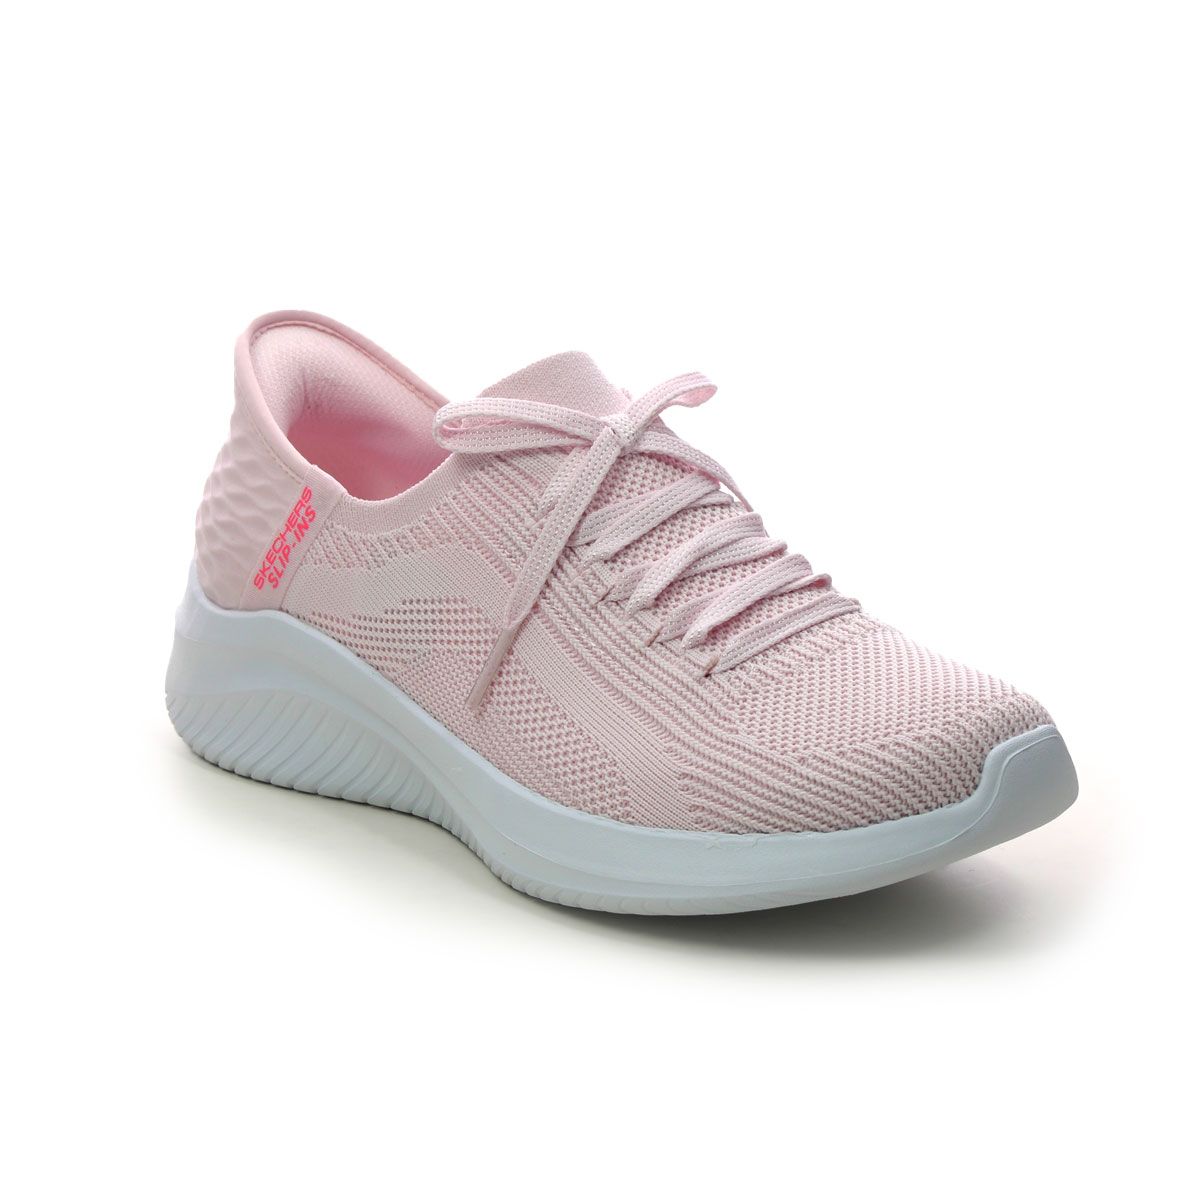 Skechers Slip Ins Ultra LTPK Light pink Womens trainers 149710 in a Plain Textile in Size 7